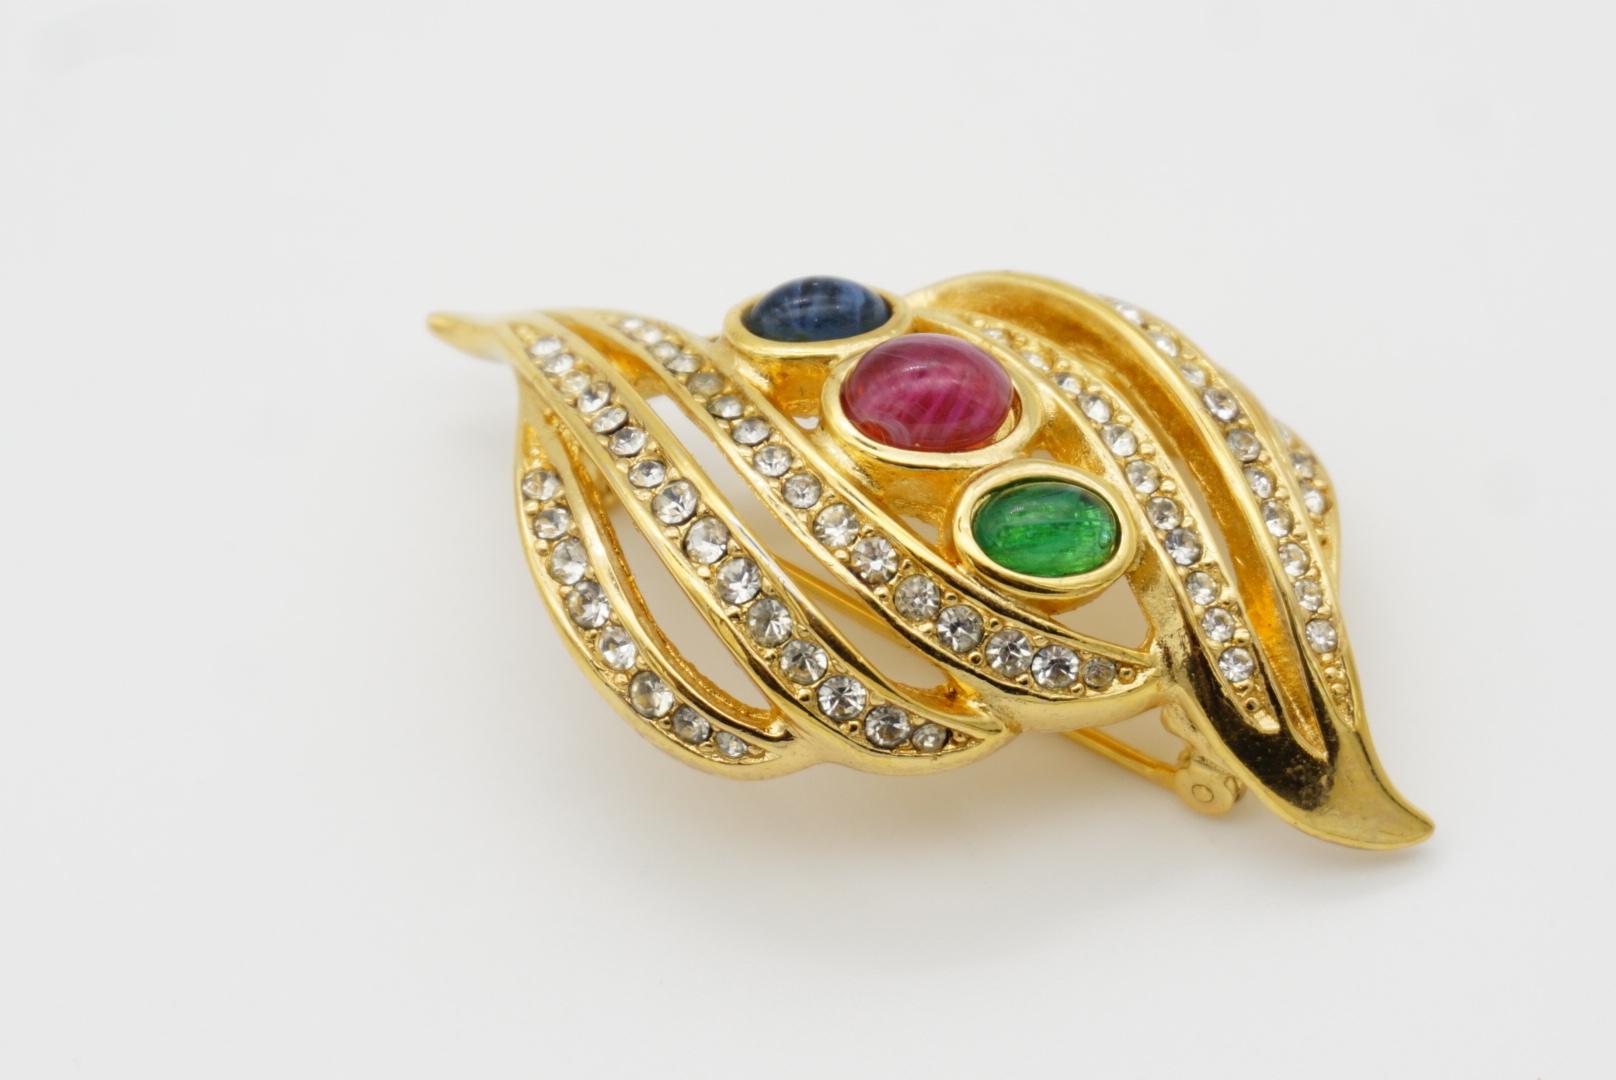 Christian Dior Vintage Gripoix Emerald Ruby Sapphire Crystals Openwork Brooch For Sale 8